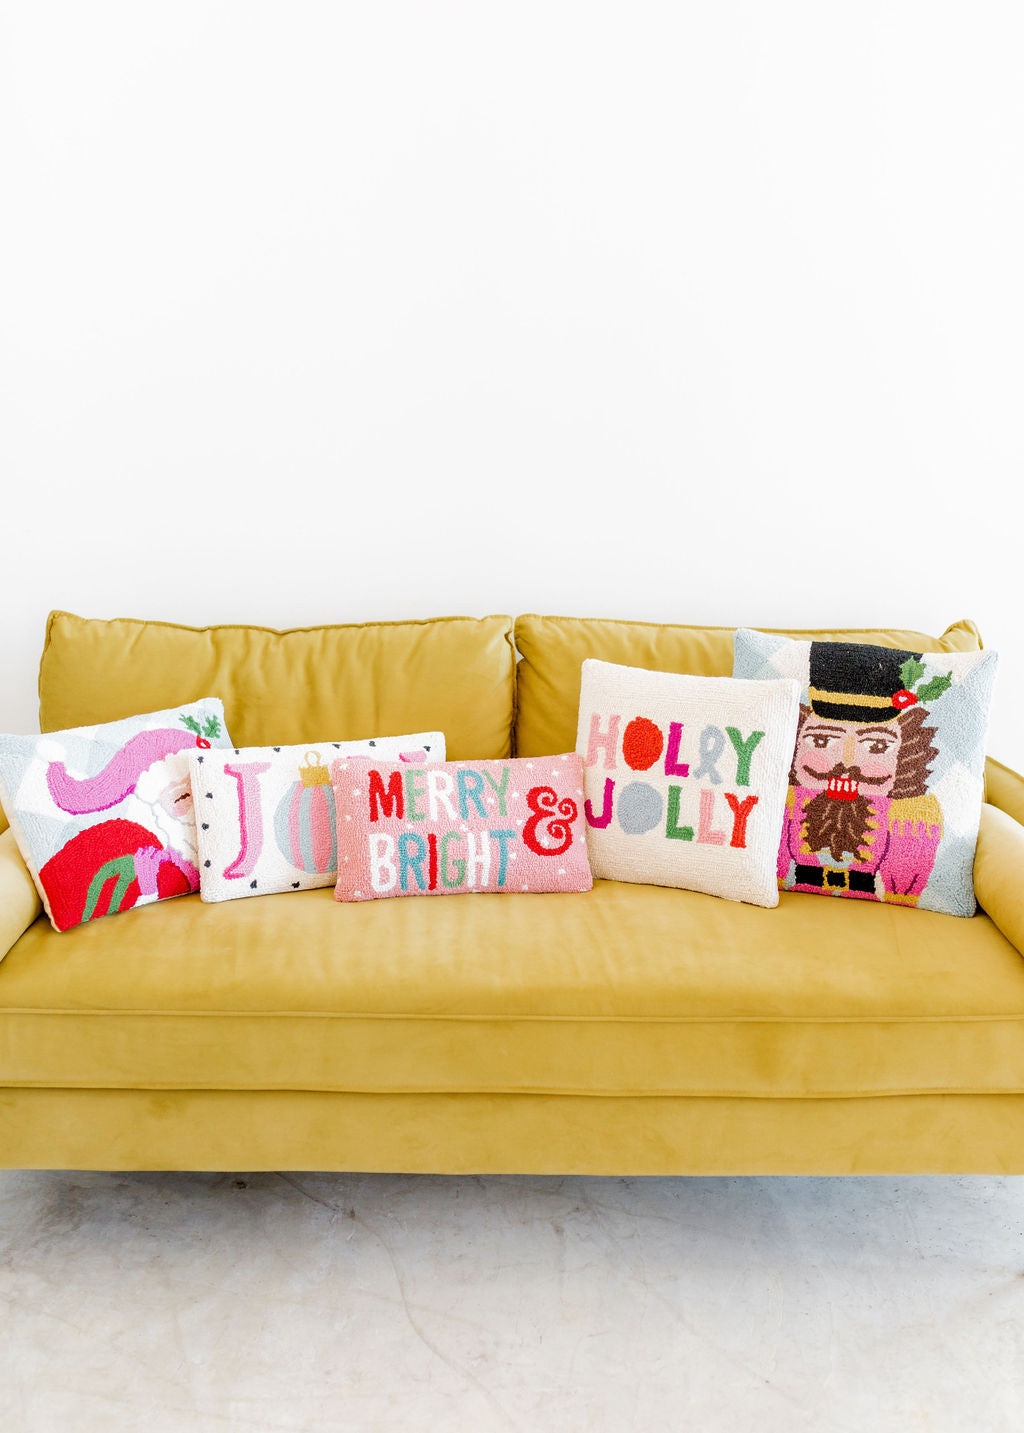 Merry And Bright Hook Pillow